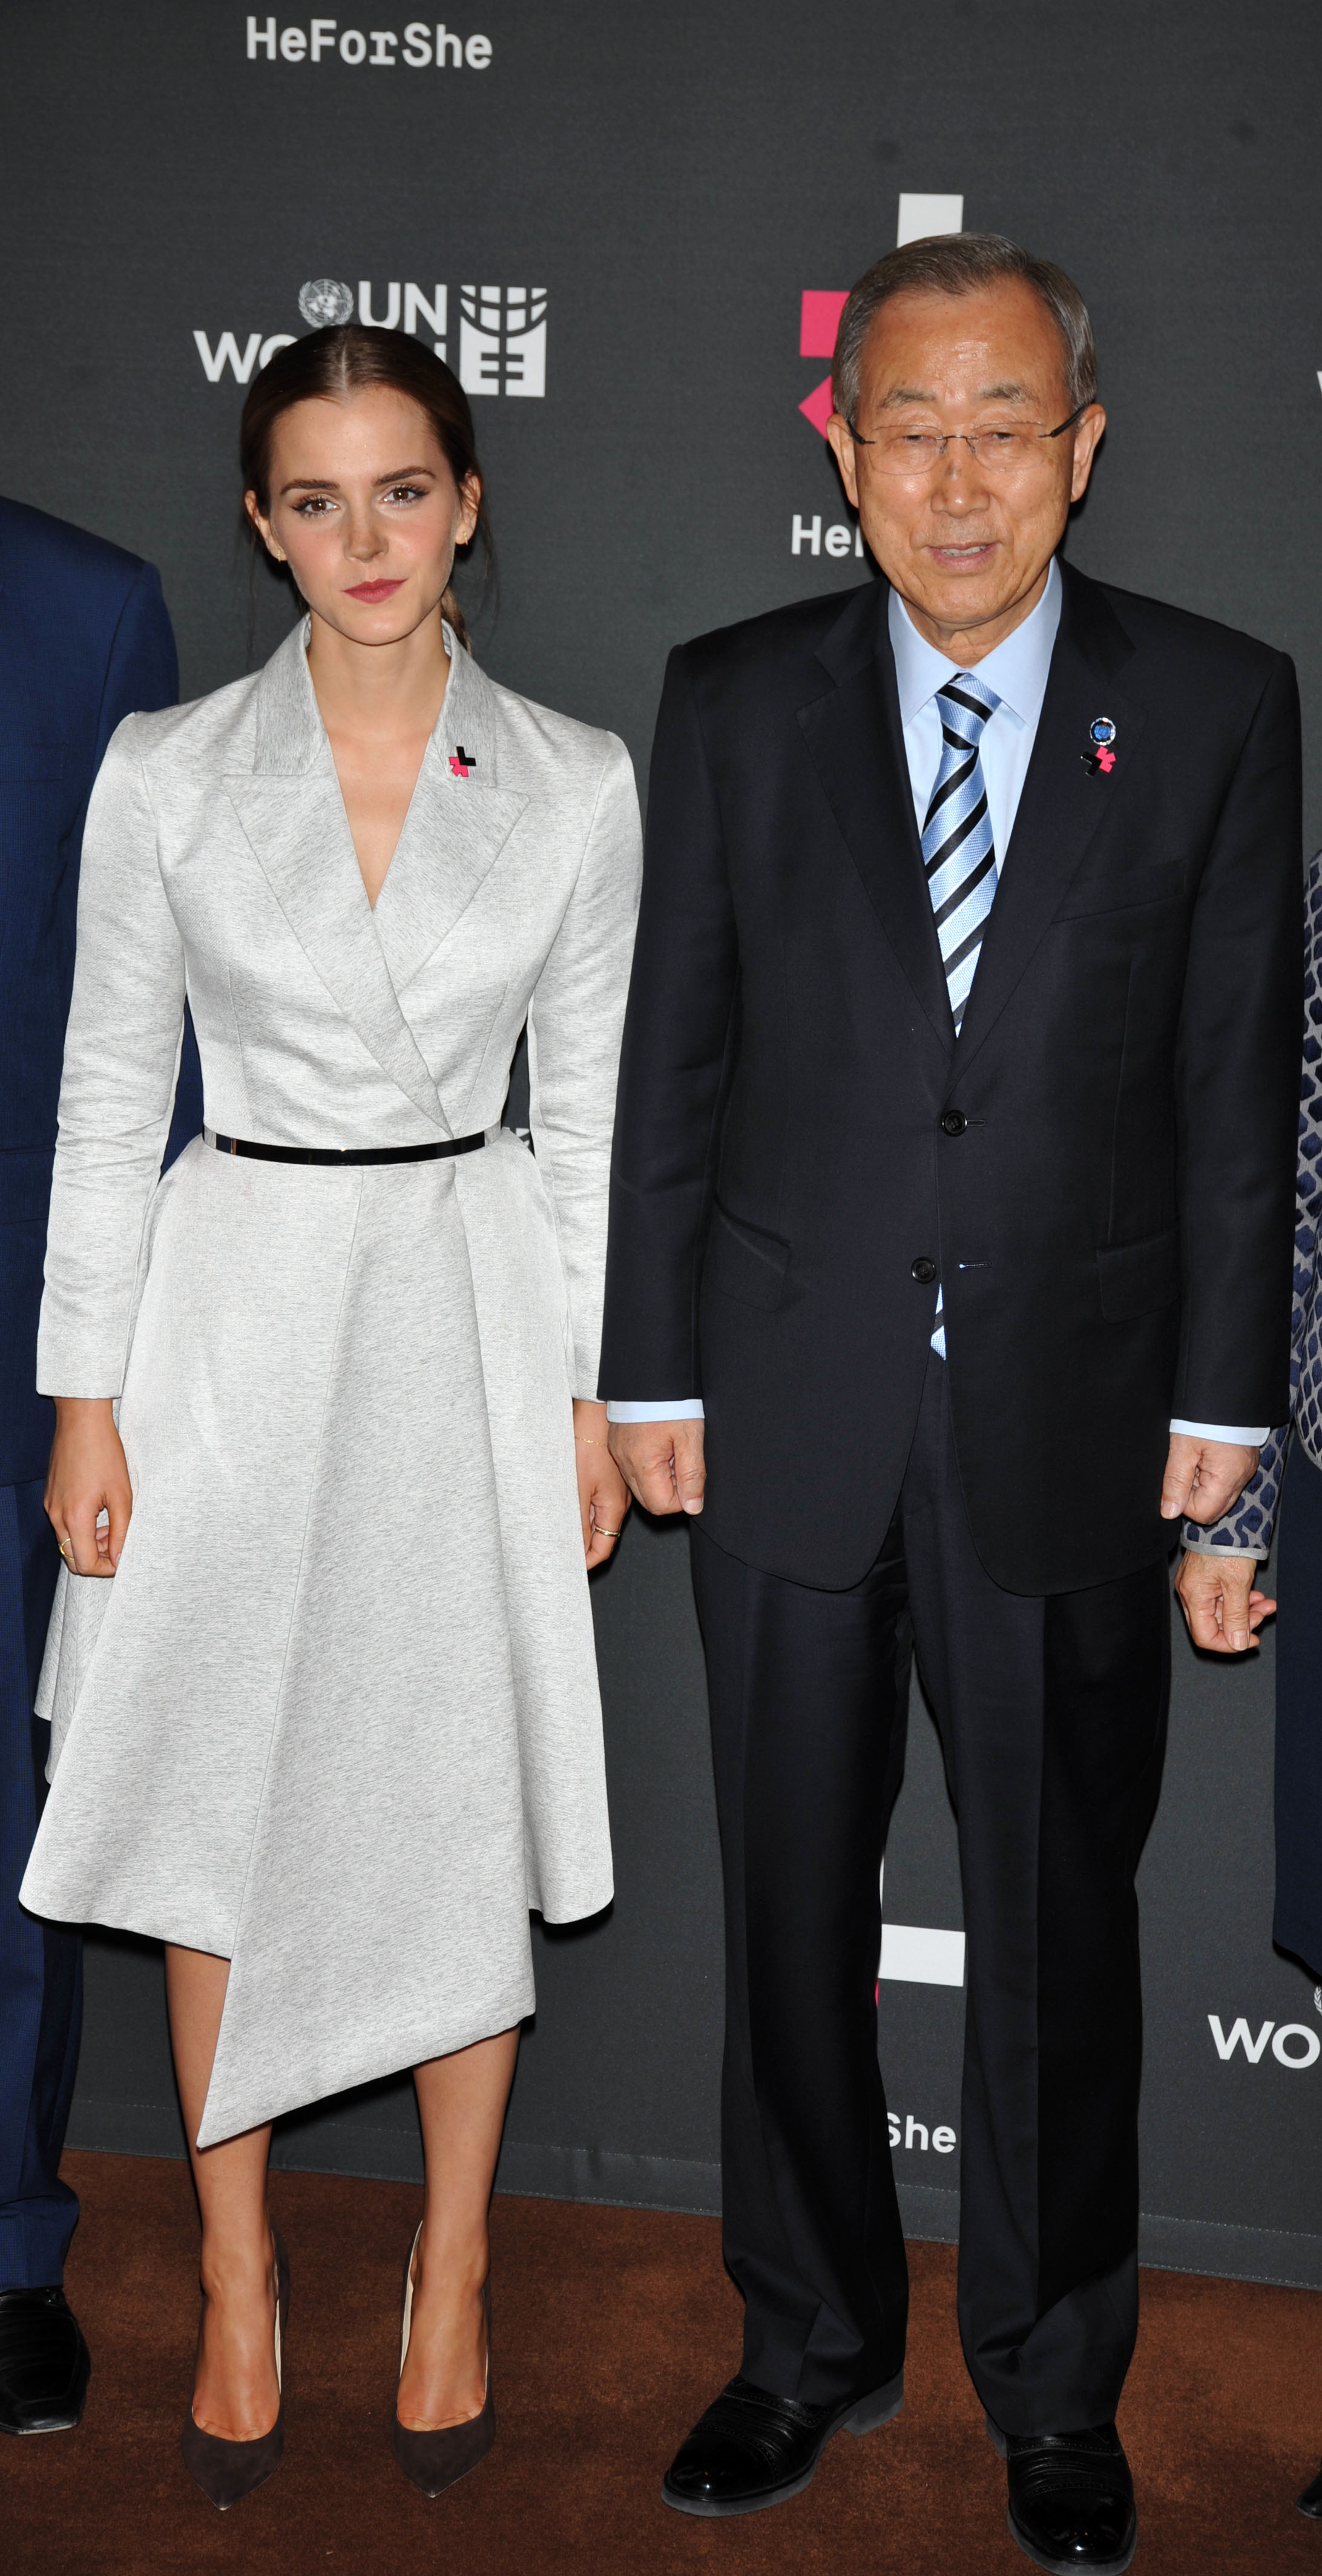 Emma Watson, Ban Ki-Moon attends the launch of the HeForShe Campaign at the United Nations on September 20, 2014 in New York City.  (Steve Sands--WireImage) (Steve Sands&mdash;WireImage)